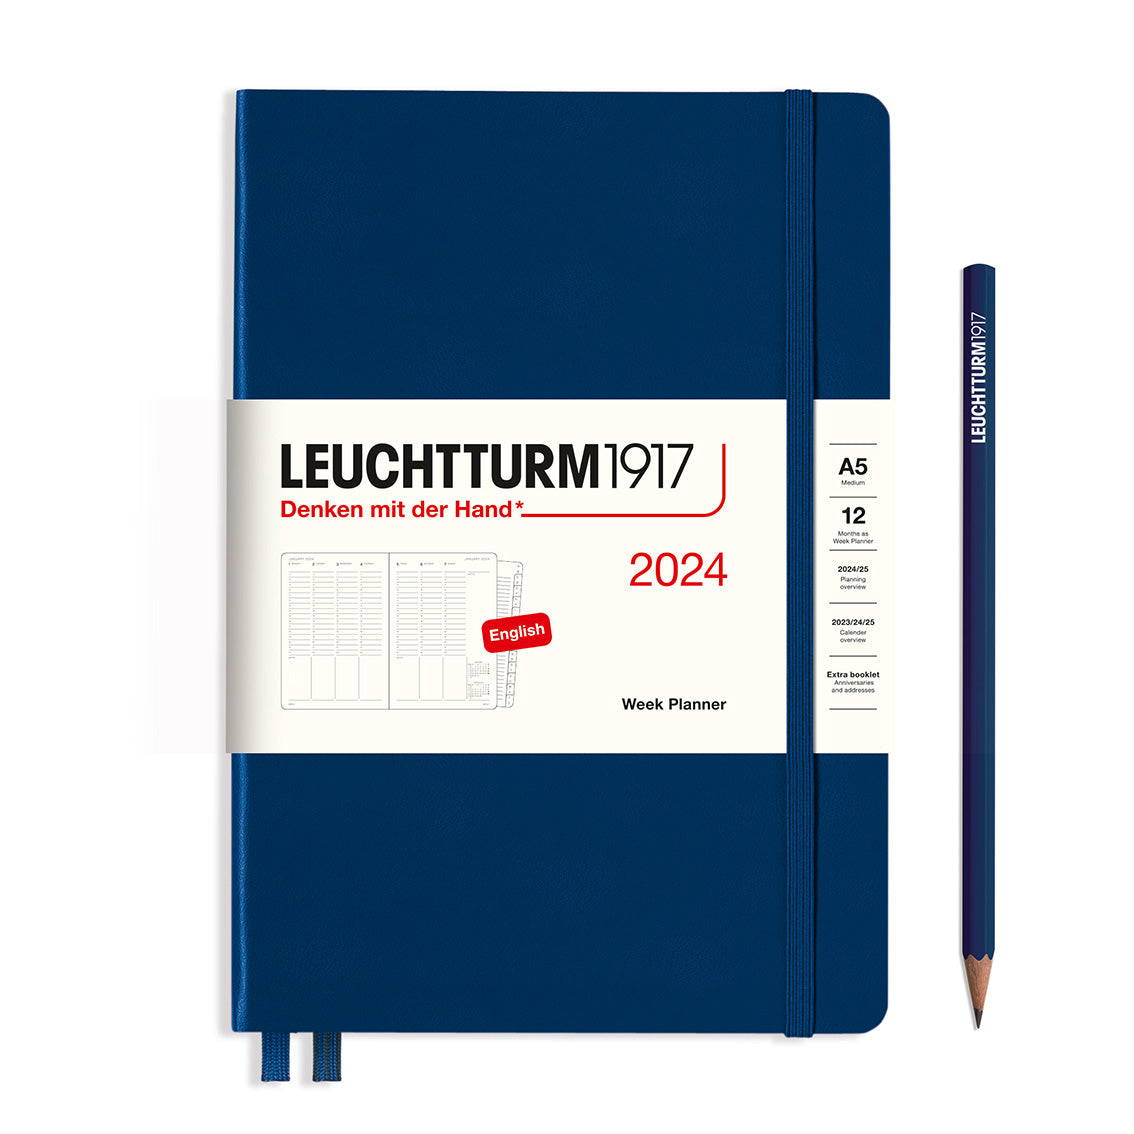 An image of a navy planner with a navy elastic band holding it together and a cream paper wrap around the middle stating the business name Leuchtturm1917, that it is for the year 2024, it is a week planner, is A5 in size and an English language version. It has an image on the wrap showing the inside layout which is a week across 2 pages set out as appointments. A navy pencil is shown at the side of the planner.